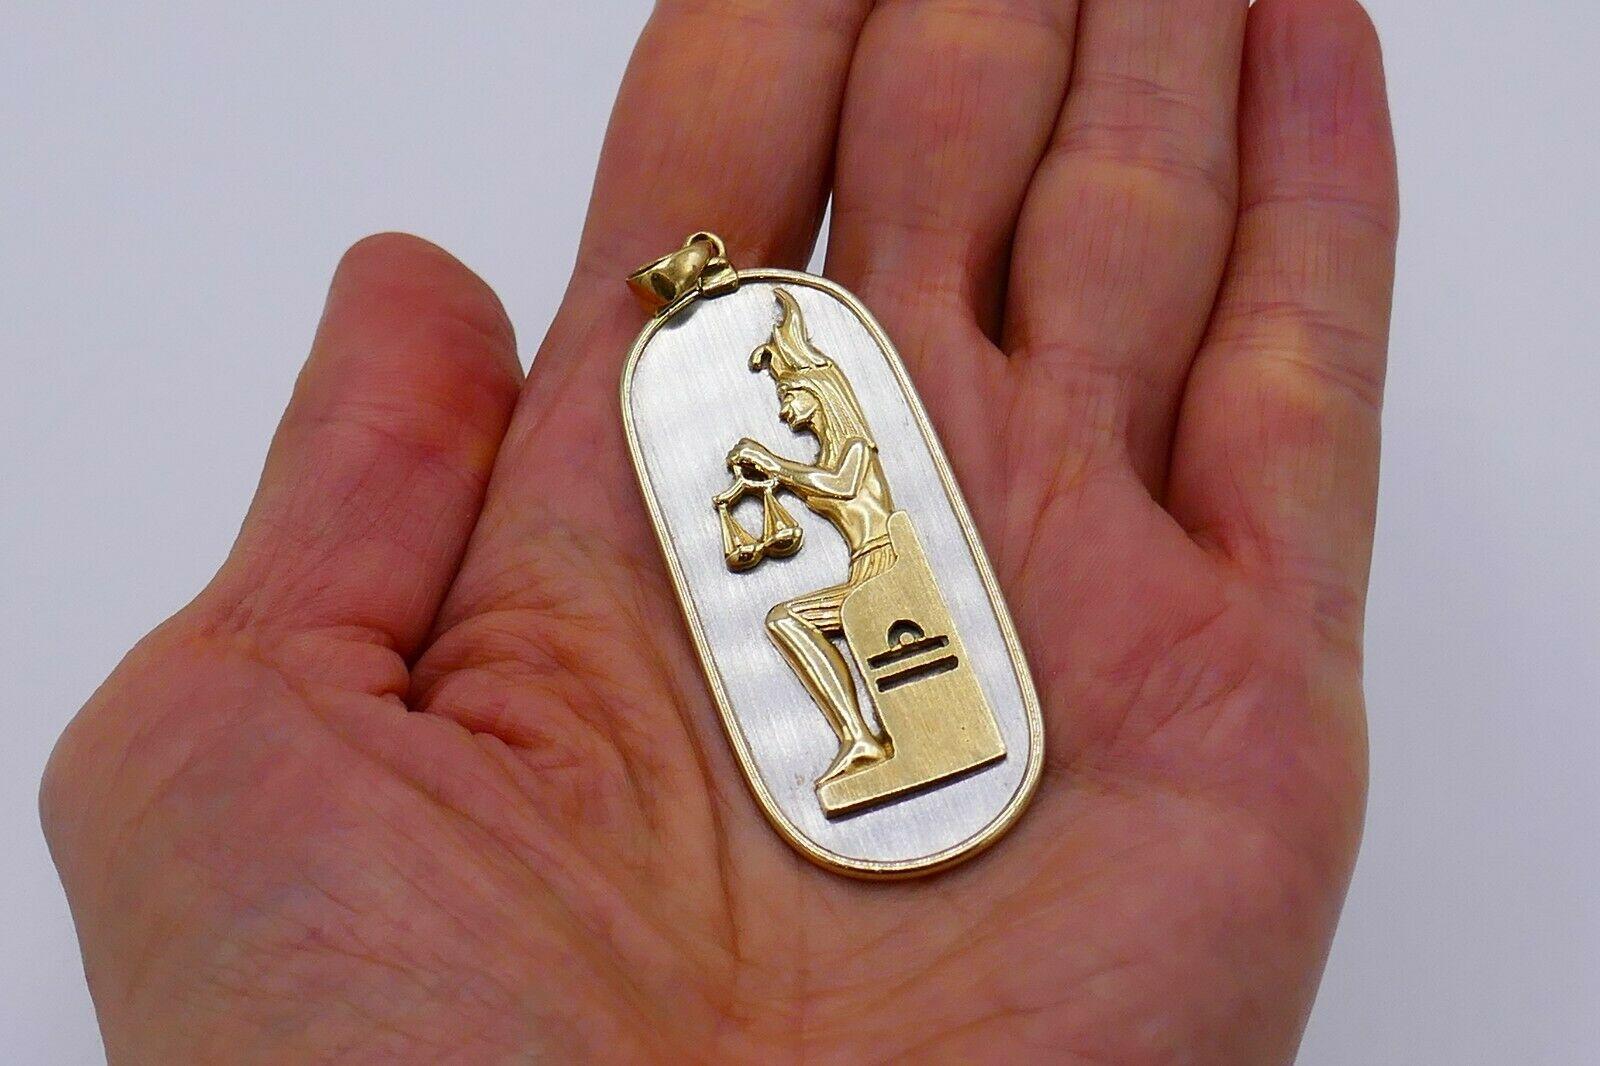 Amazing vintage (1970s) Libra astrological sign pendant made of 14k yellow and white gold. Stamped with a maker's mark and a hallmark for 14k gold.
Measurements: 2.5